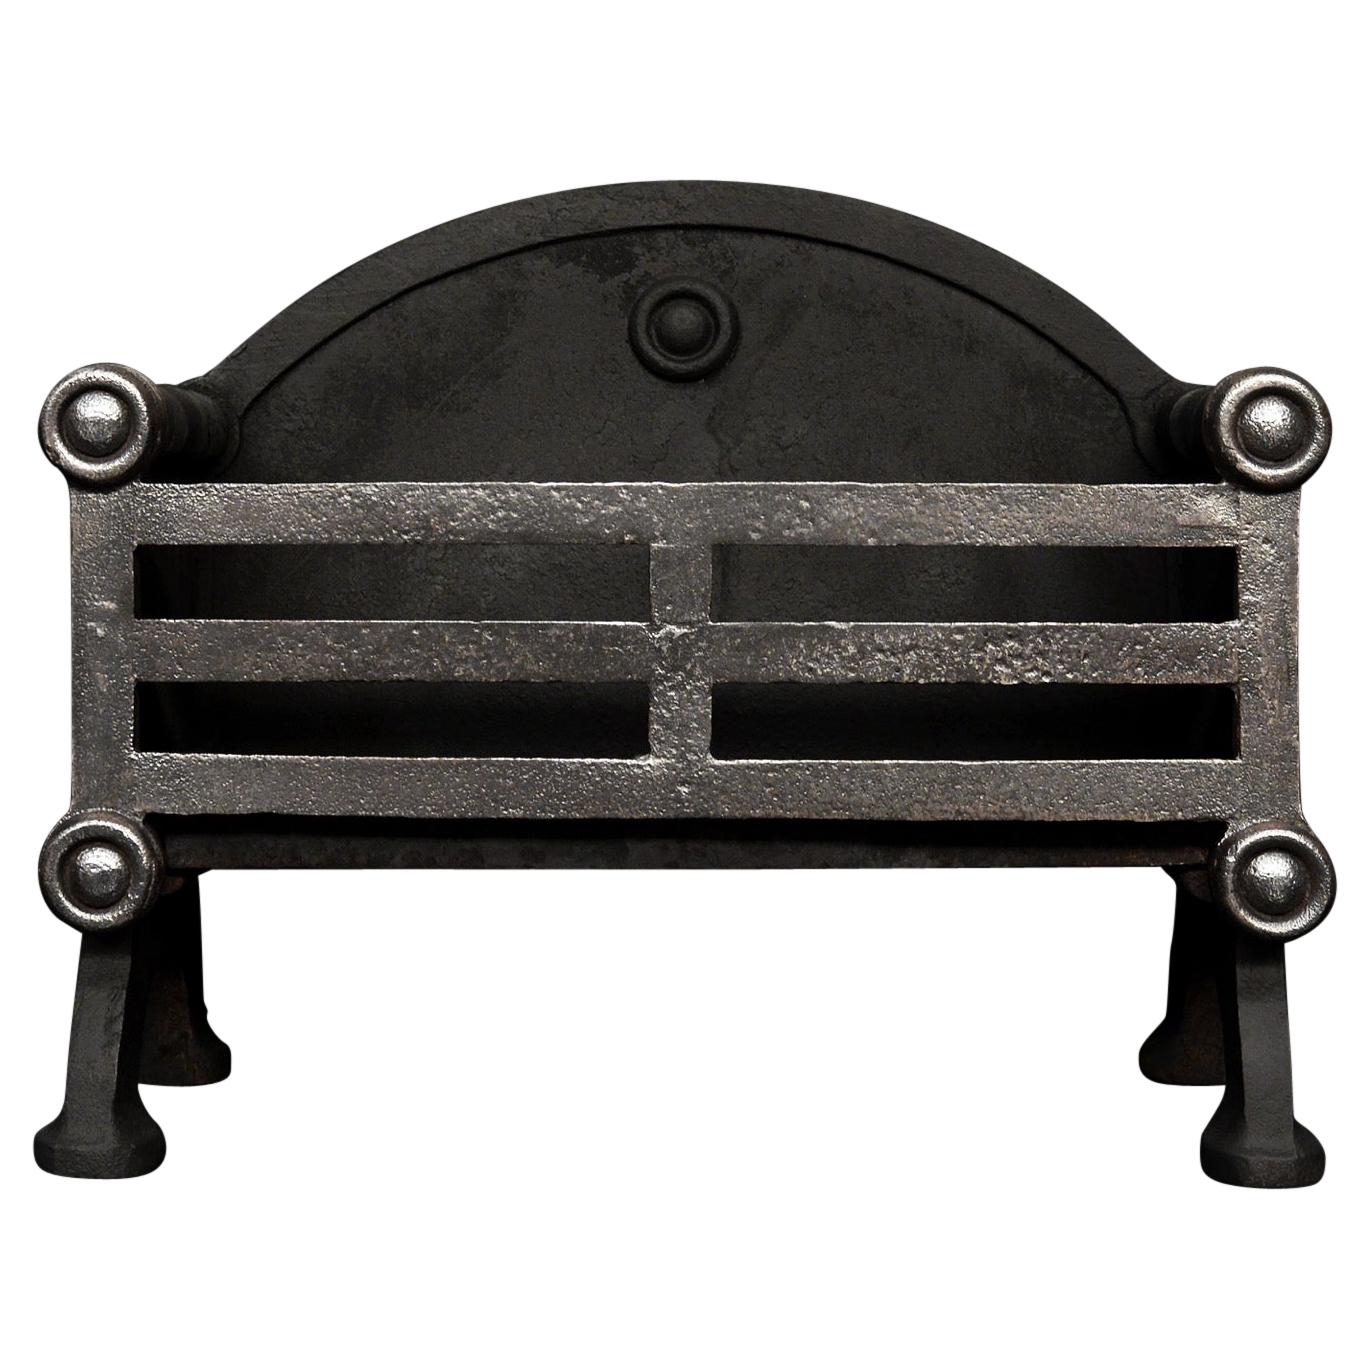 Polished Cast Iron Firegrate For Sale